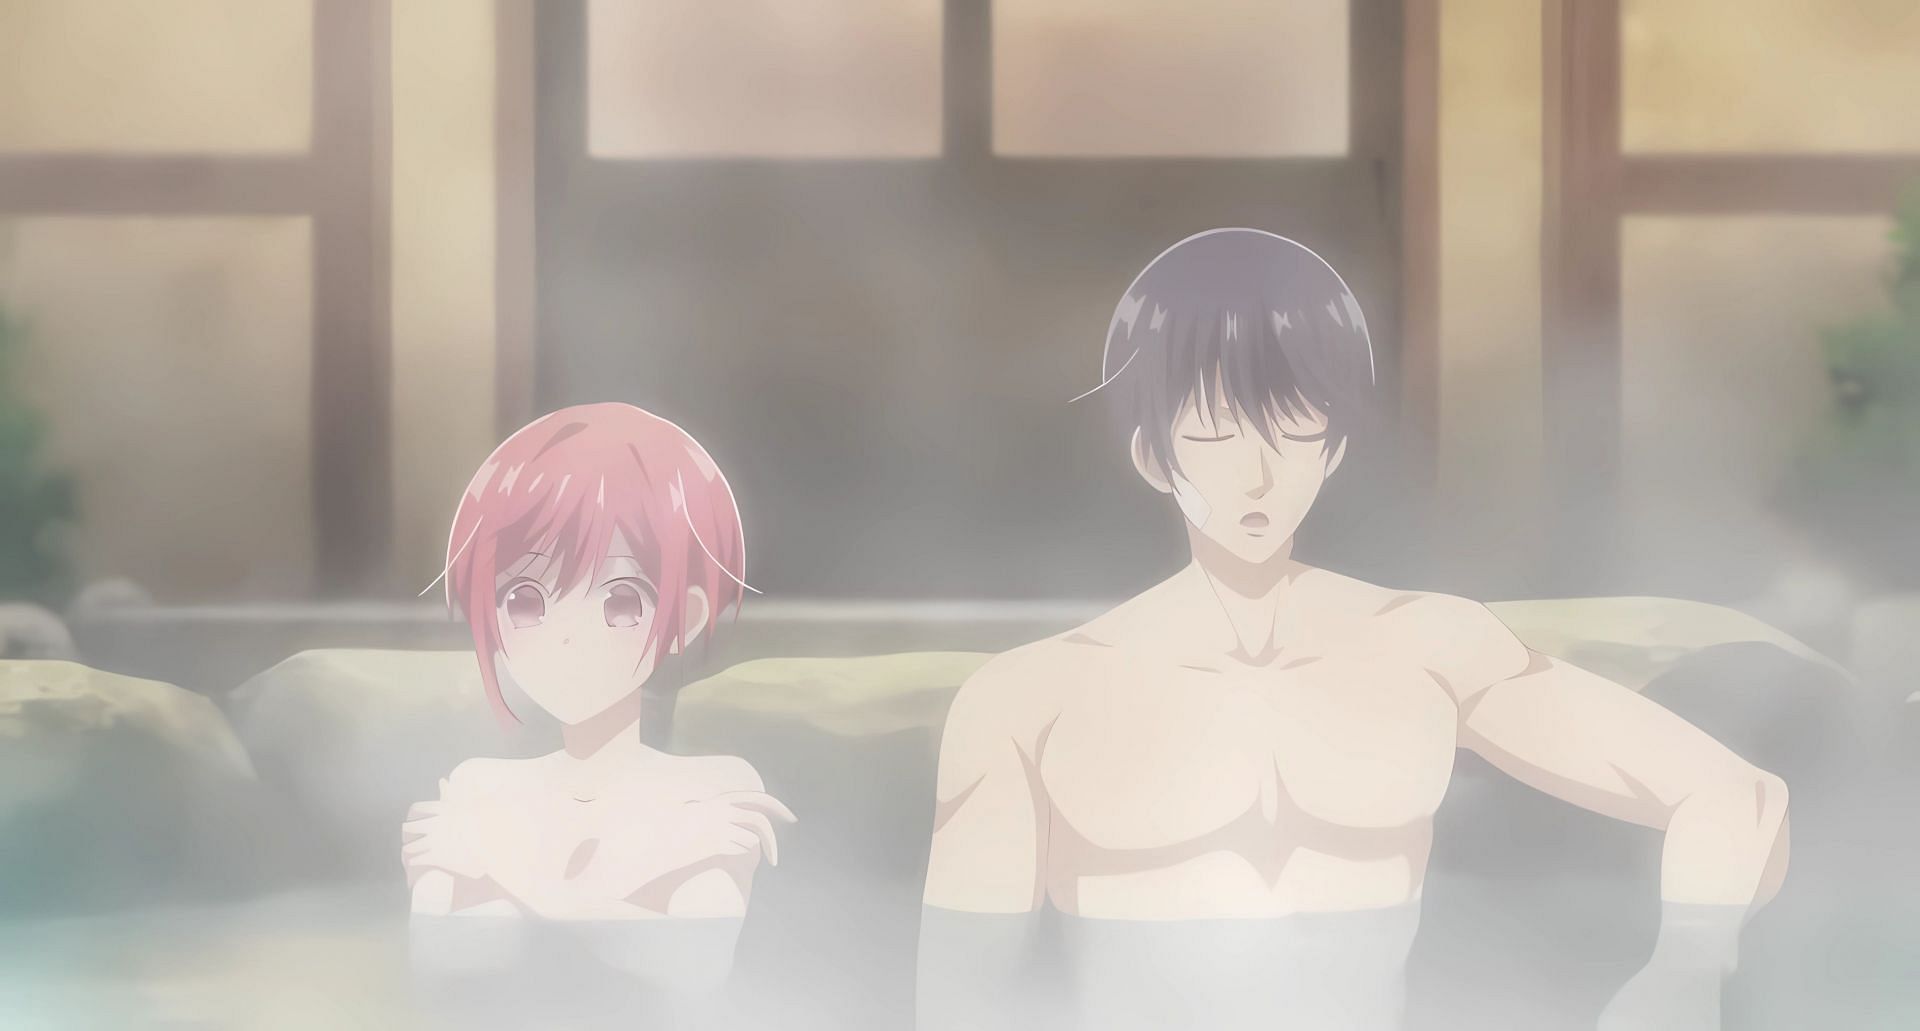 Mito (left) and Ren (right) as seen in the third episode (Image via Studio Blanc)